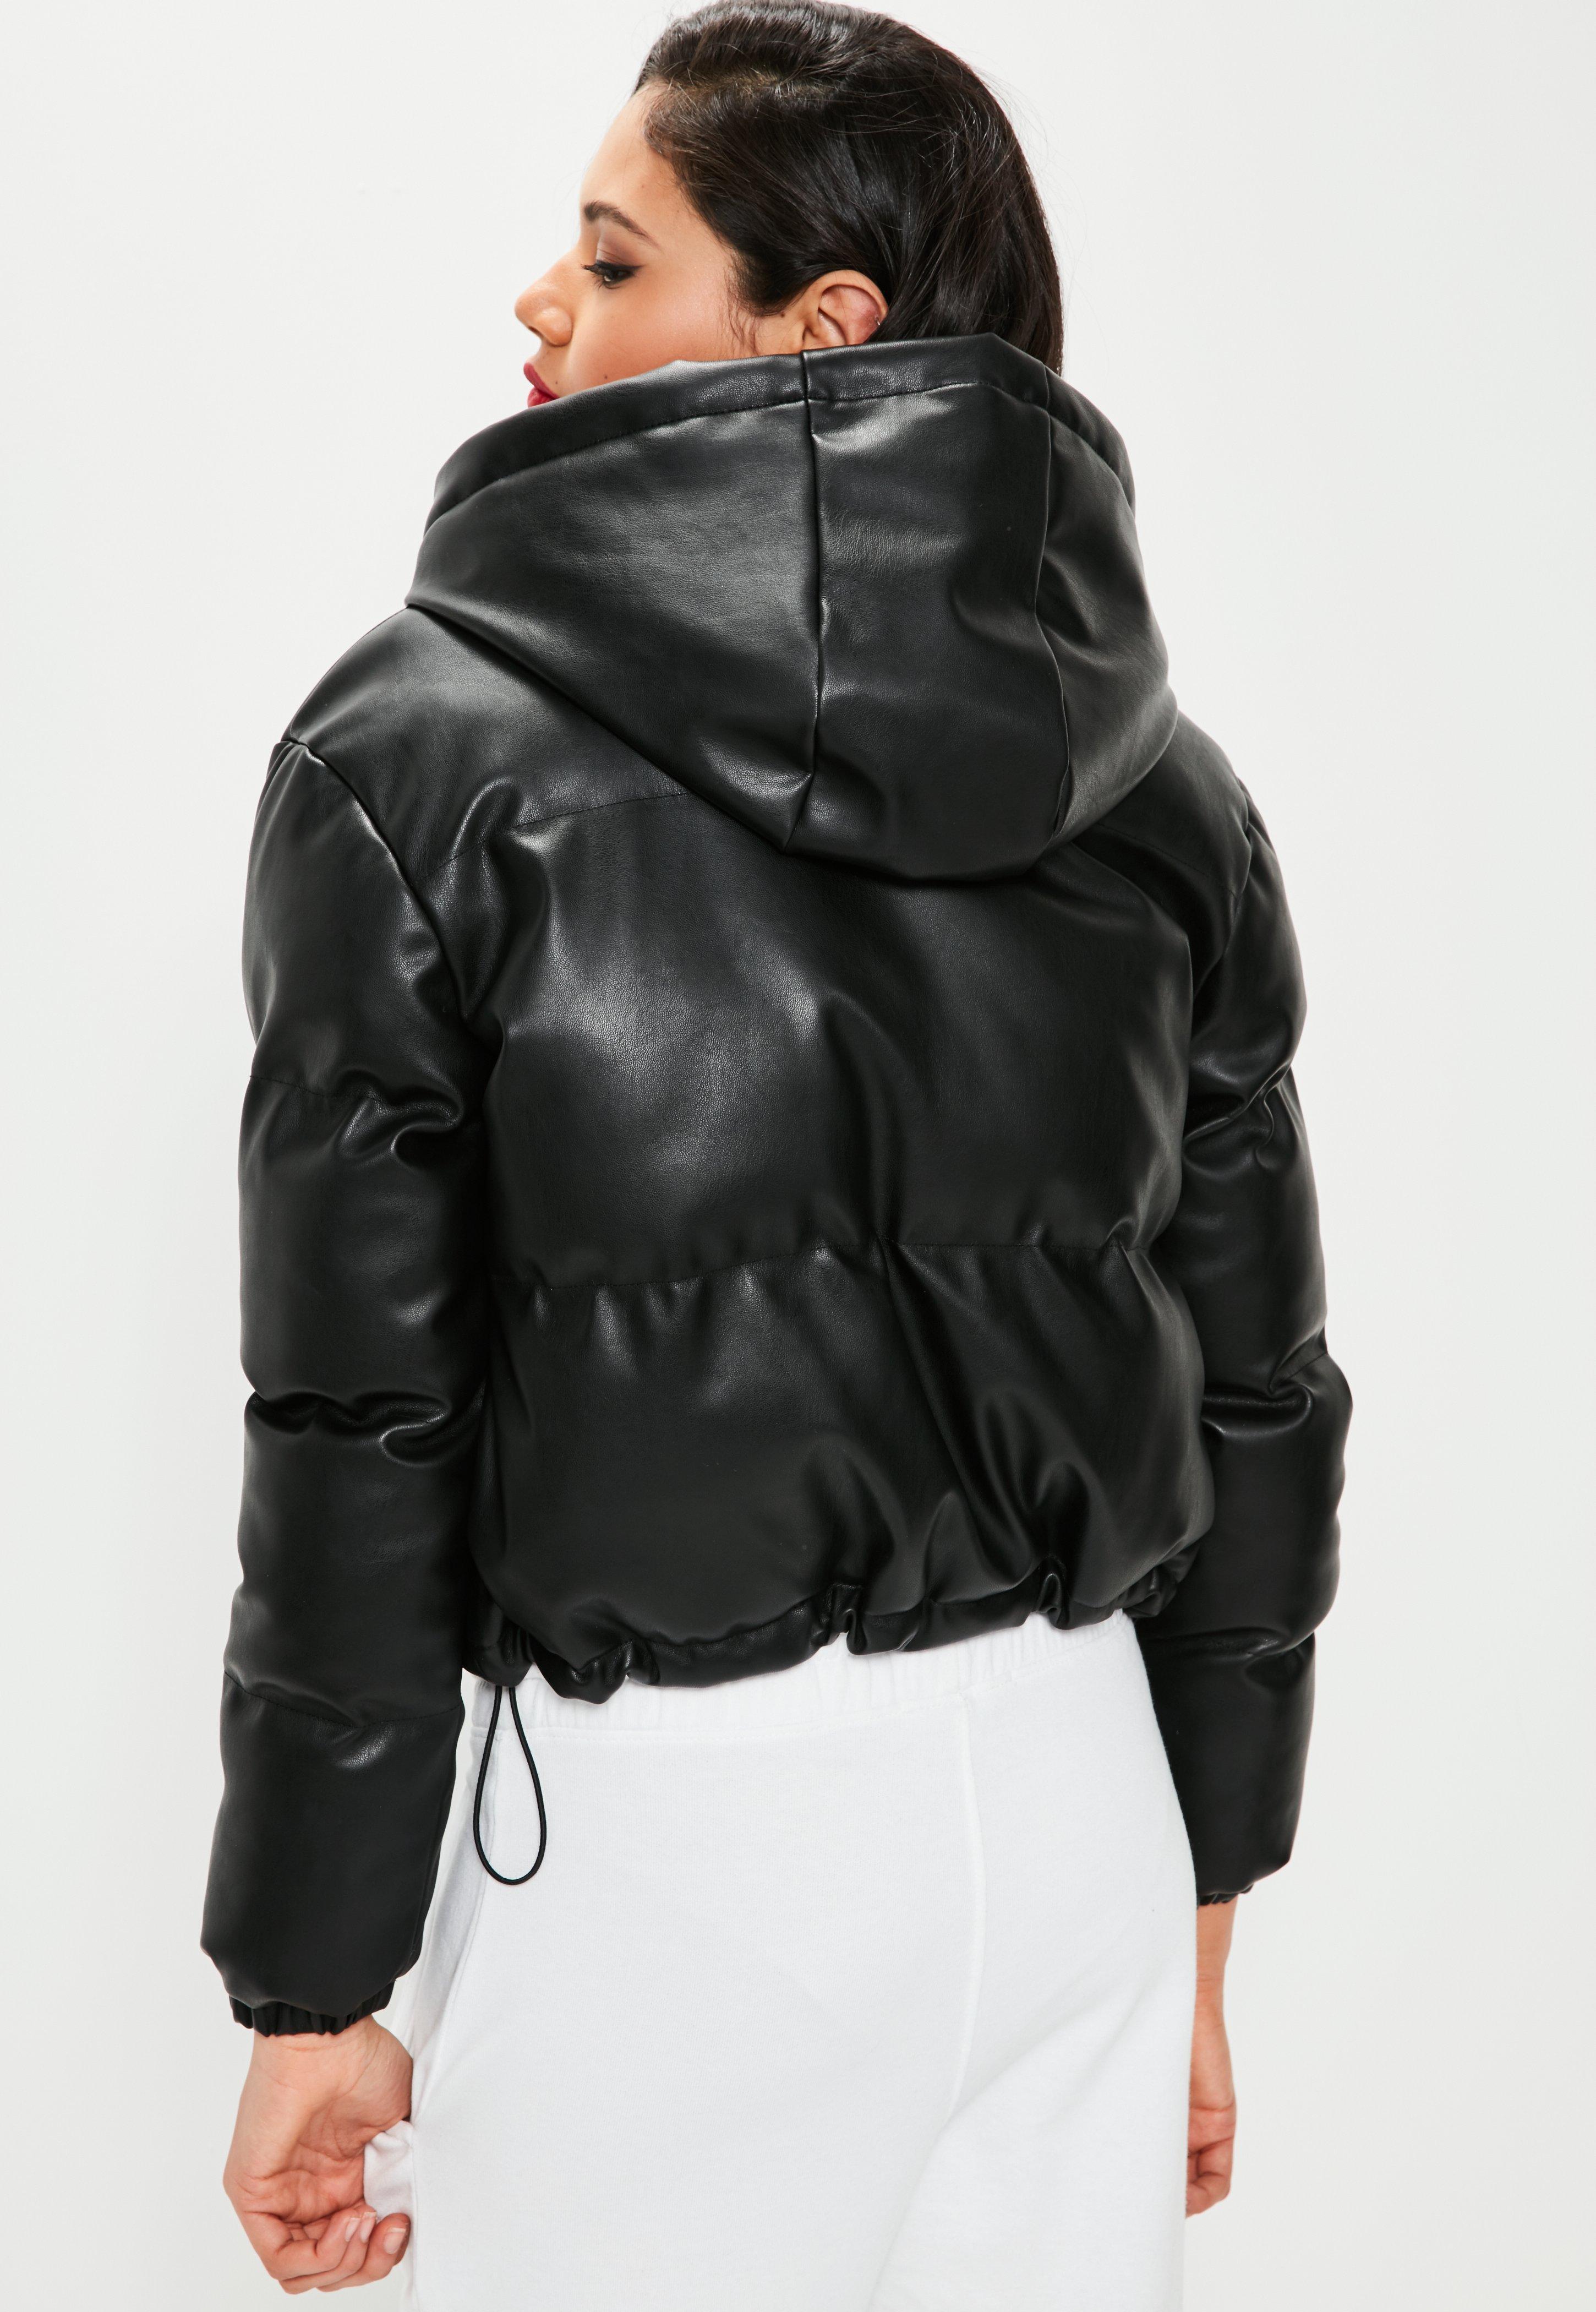 Buy missguided leather puffer jacket> OFF-71%